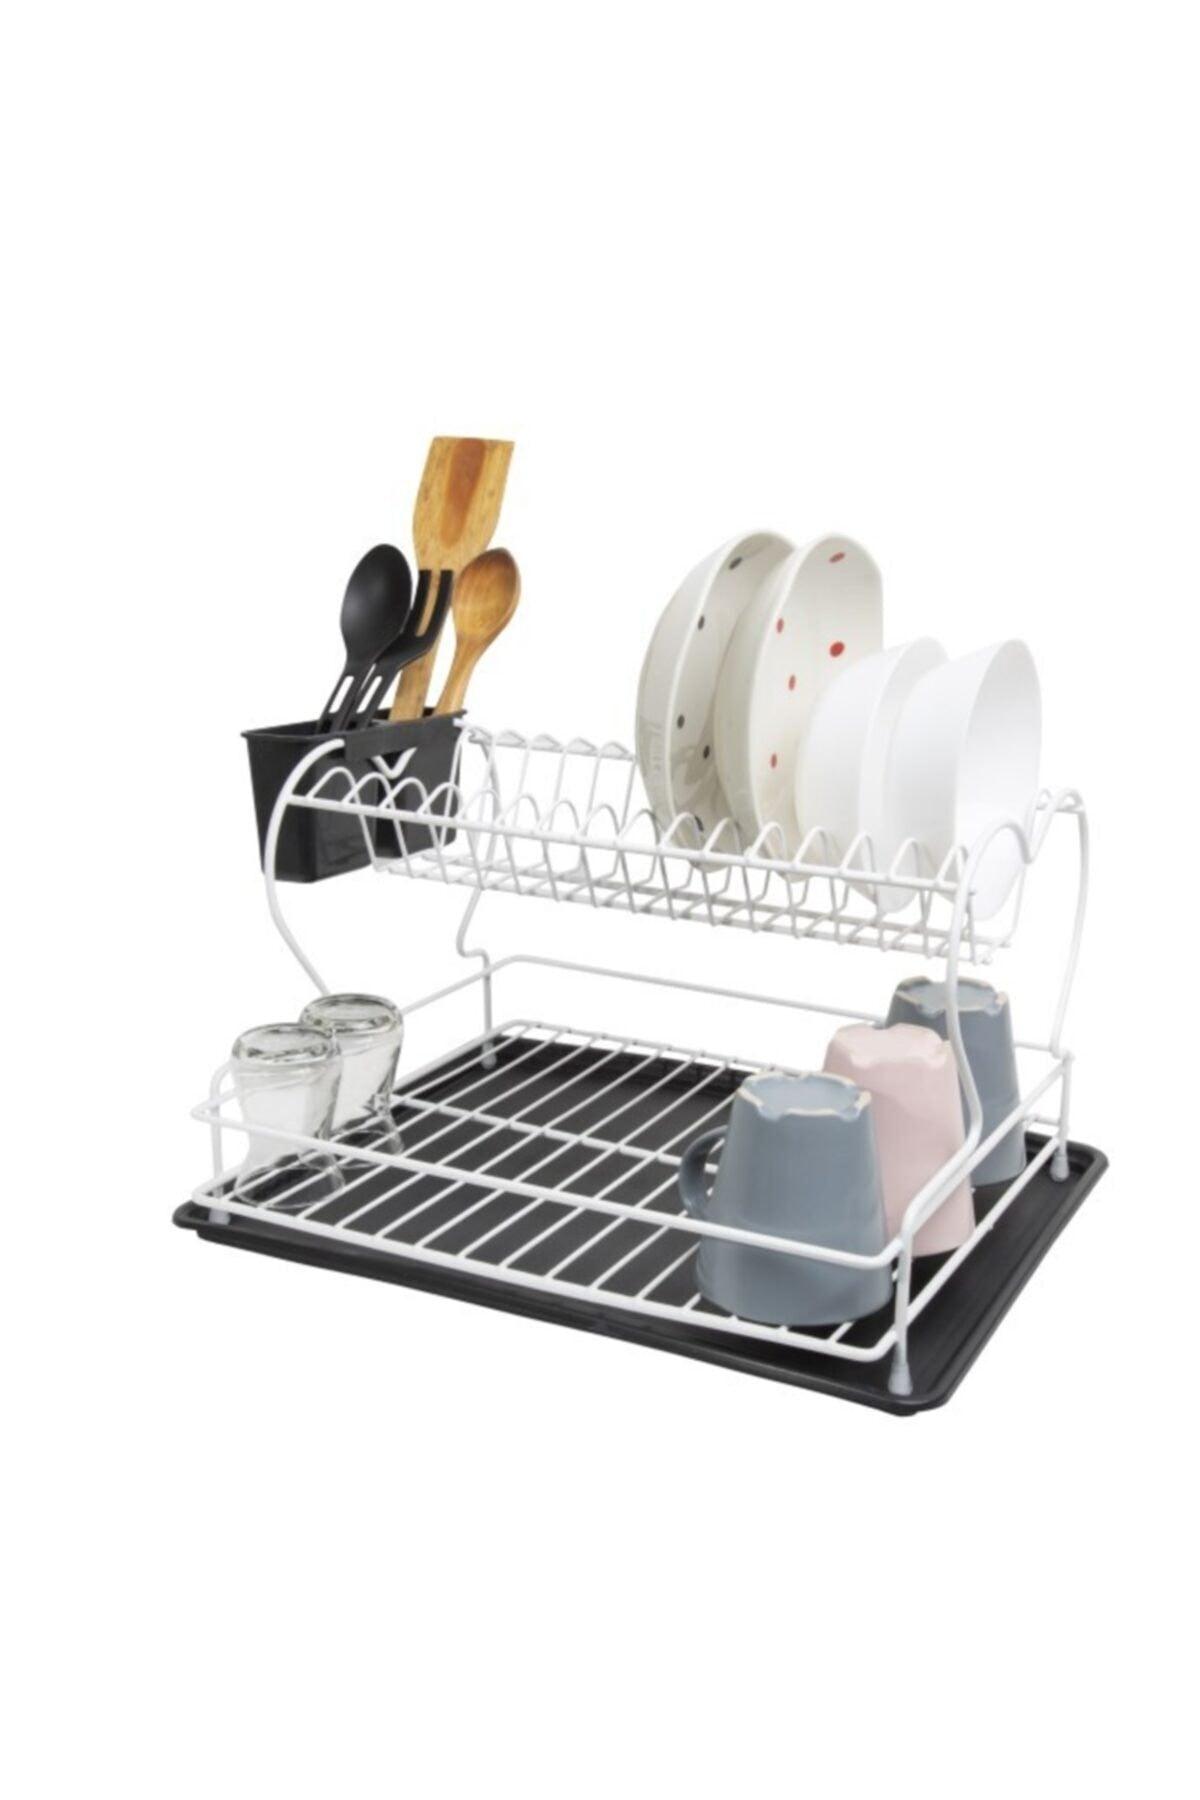 Lifetime Stainless Dish Rack Dish Basket Two Layer Plate Rack Thermo Plastic Coating White - Swordslife